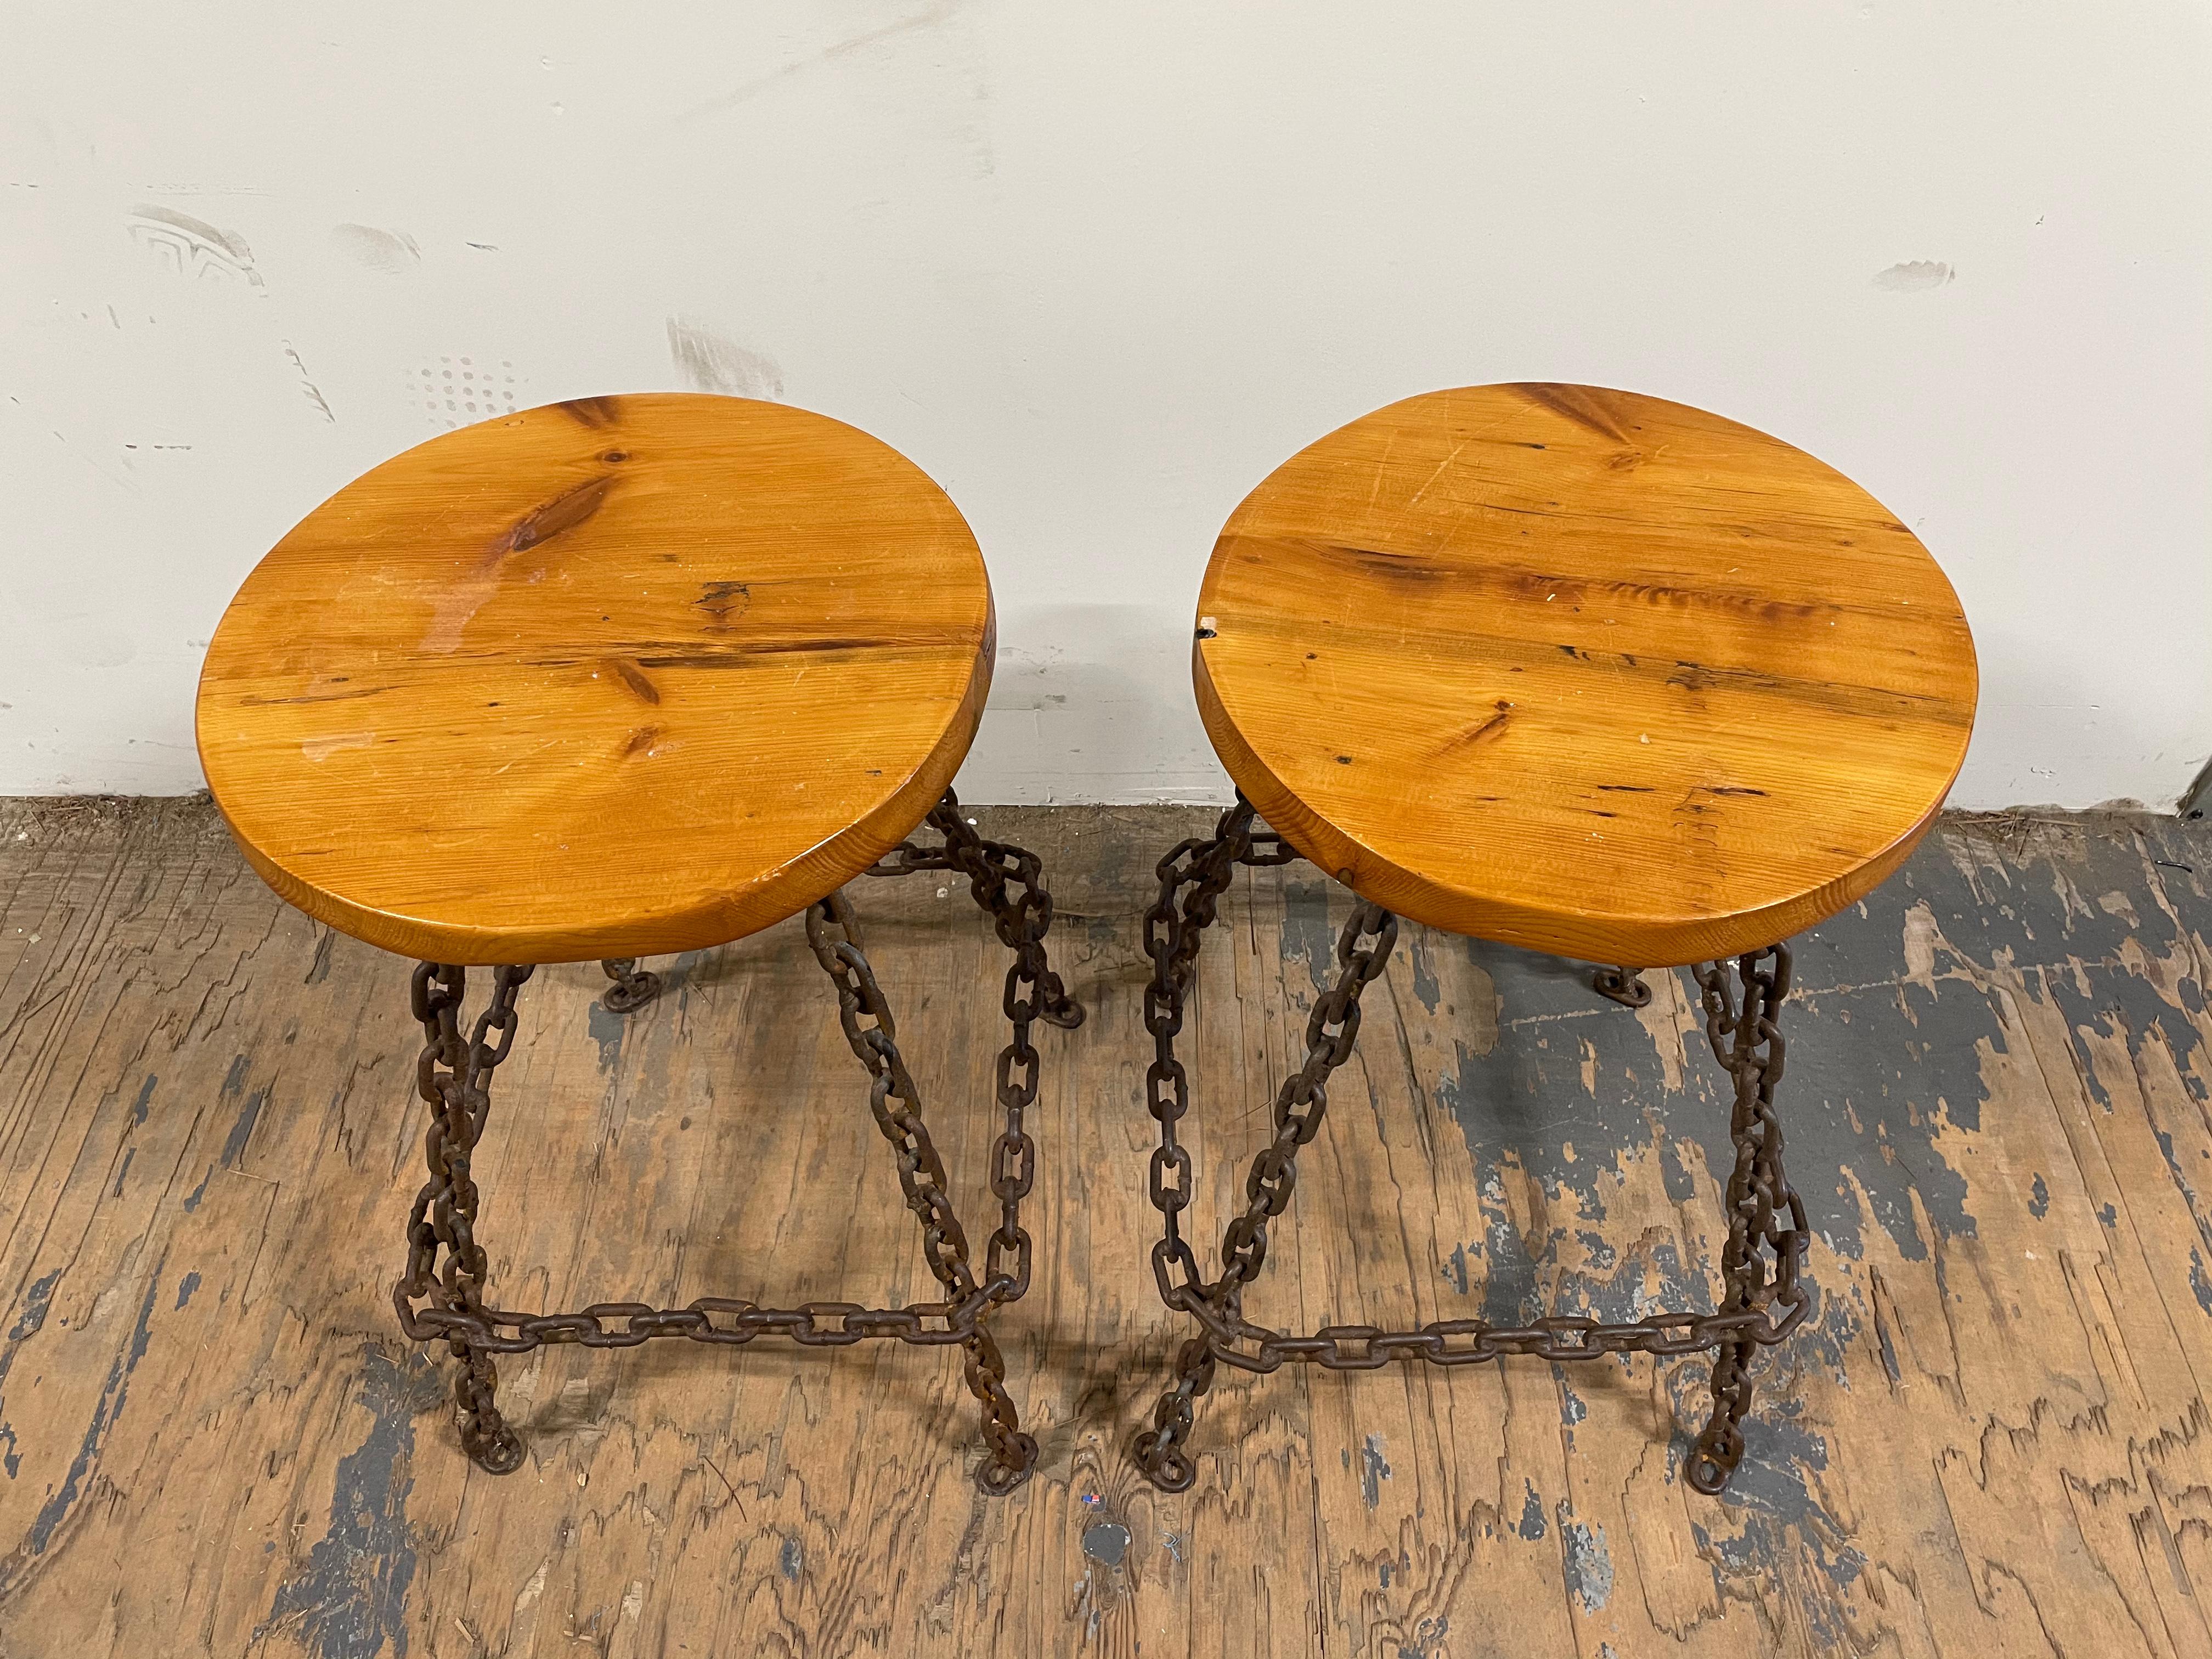 Metal Set of 4 Brutalist Welded Marine Chain and Wood Bar Stools - 1970's For Sale